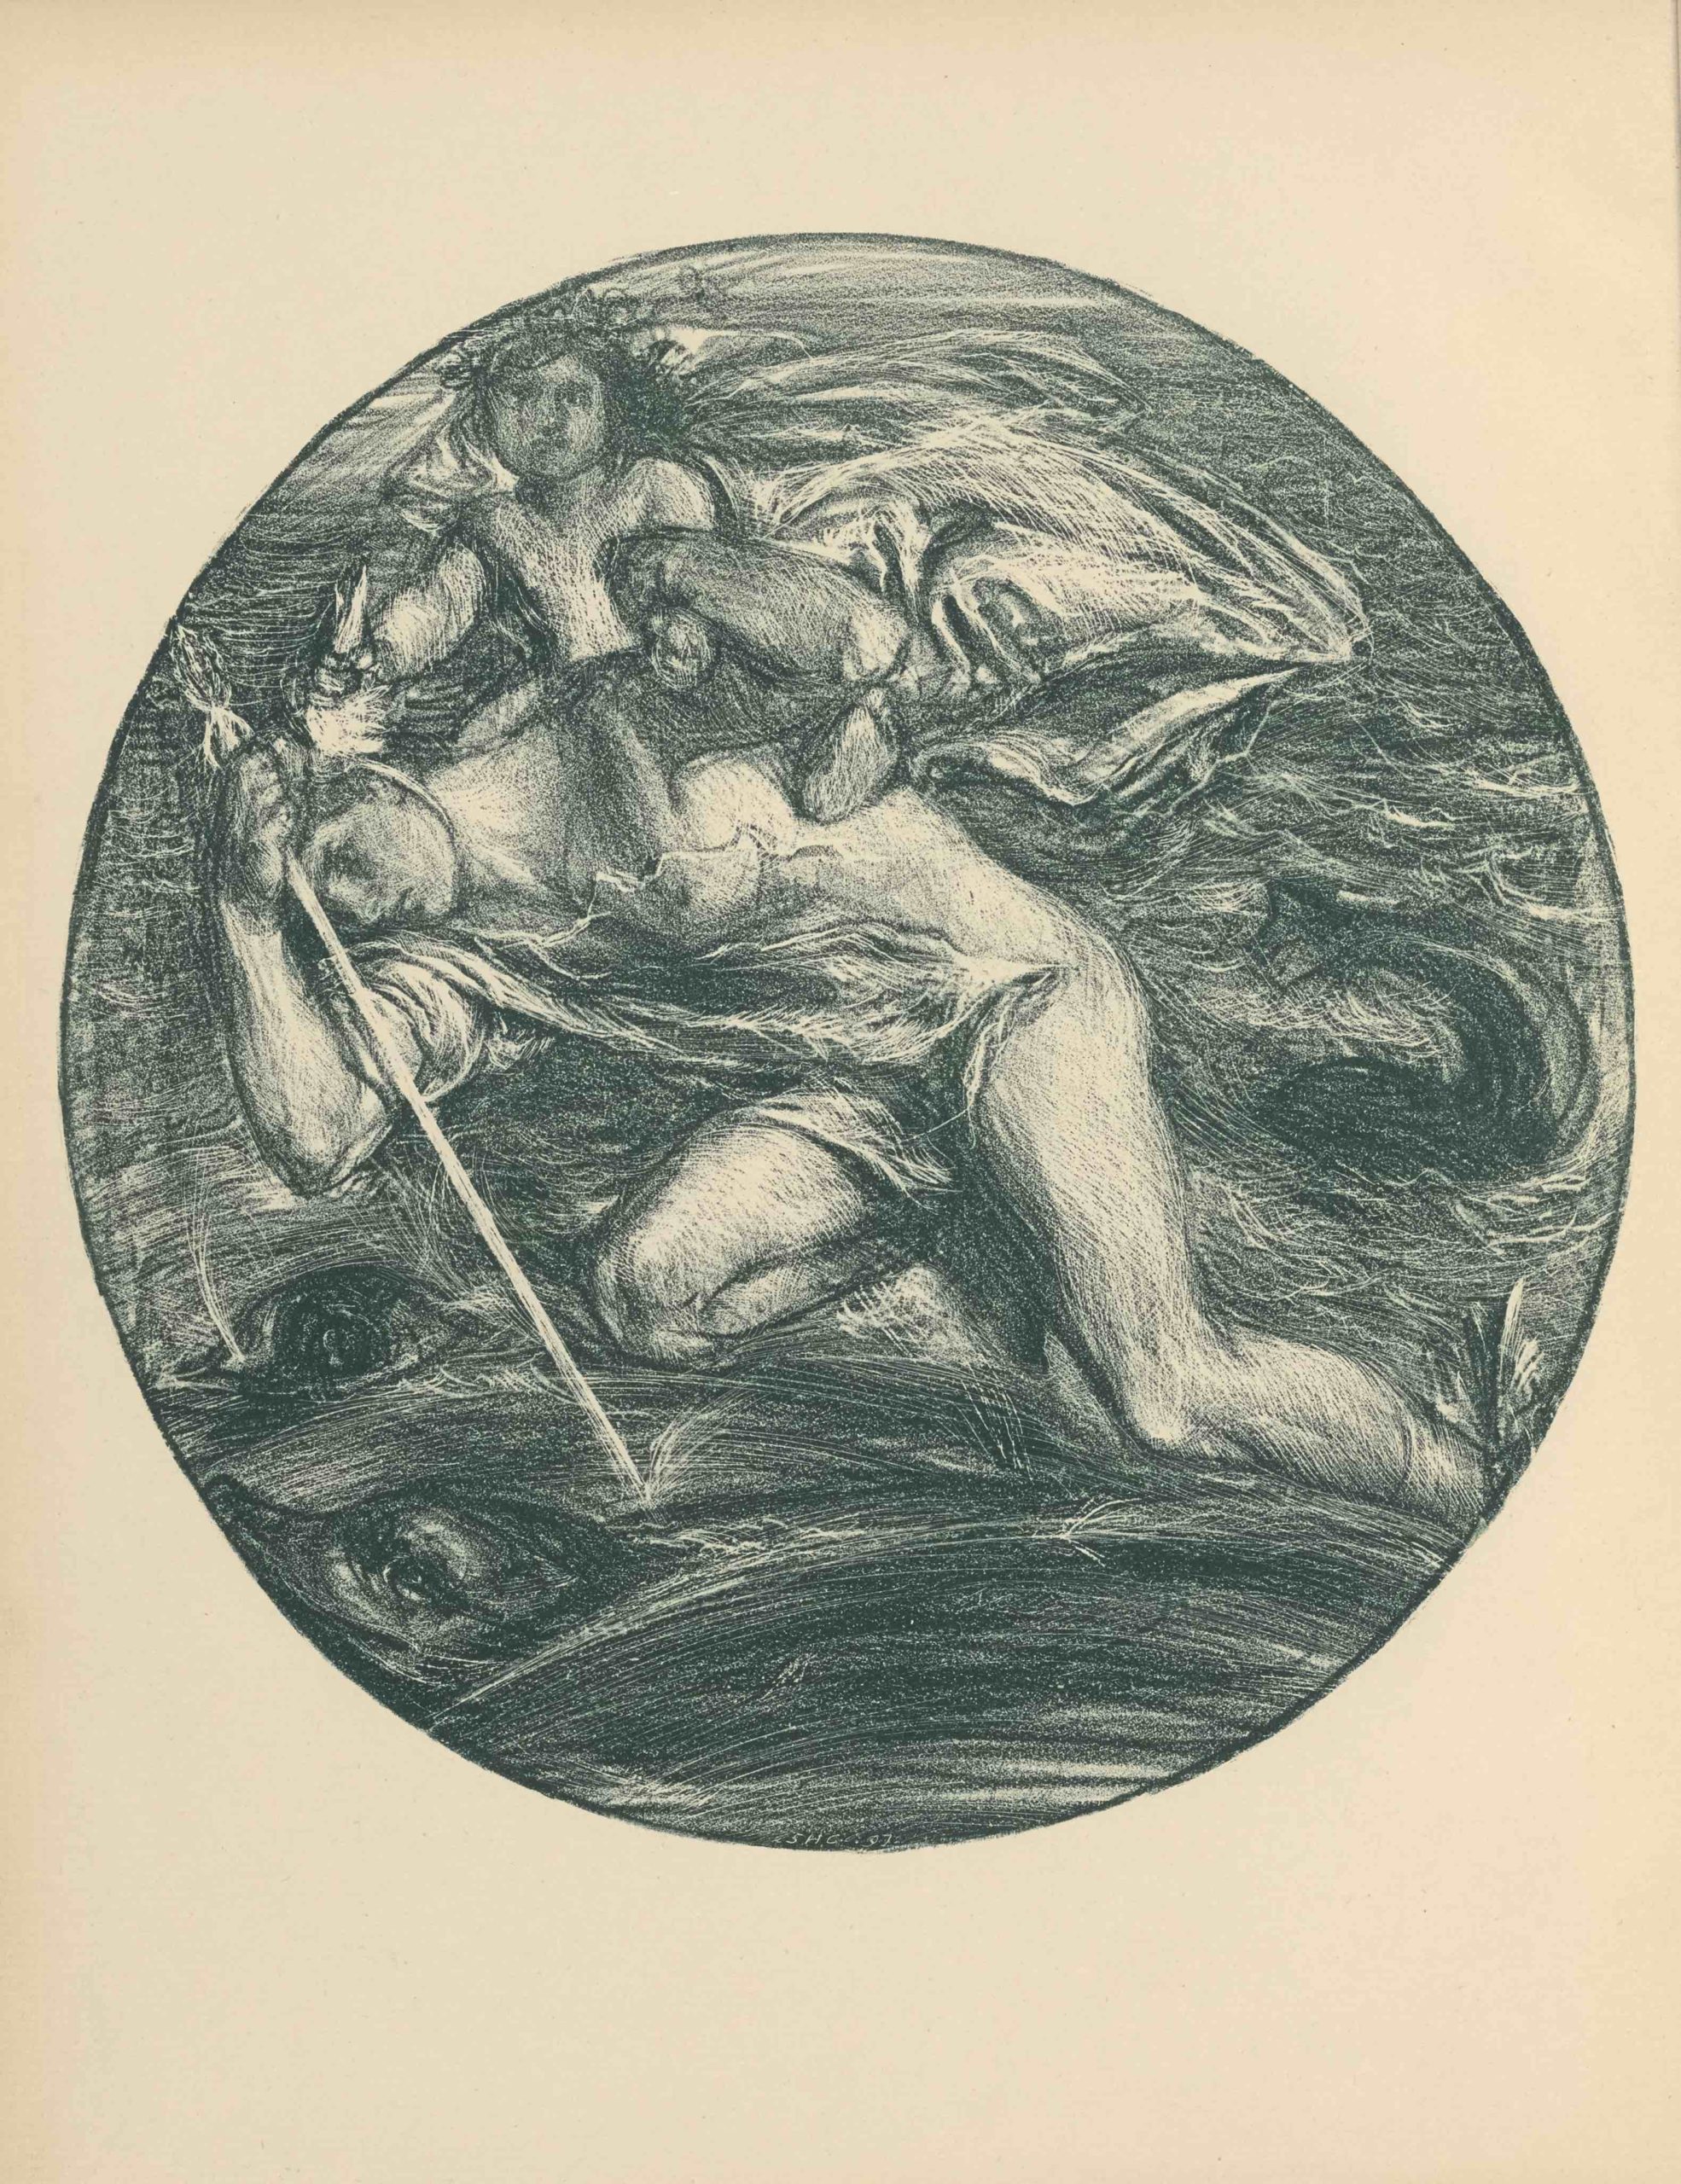 This lithograph is printed in dark blue ink in a roundel shape, with a border. The image depicts two mythological figures, Mercury and Bacchus, traveling over a sea. Mercury takes up most of the image plane; his body is bent, with his feet reaching towards the bottom right of the roundel, and his face and arms bent toward the upper left. His face, bent downwards to his right arm, is in profile. He is naked but draped, holding a scepter in his right hand and wearing a winged helmet and sandals. He carries a child, Bacchus, on his shoulders. The child is nude, and his head is garlanded with flowers. Bacchus grips one wing of the helmet with his right hand while his left arm is gripped by Mercury. Below and behind them, the sea fills the rest of the roundel. Several dolphins swim in the sea, their heads and tails sporadically emerging from the water.